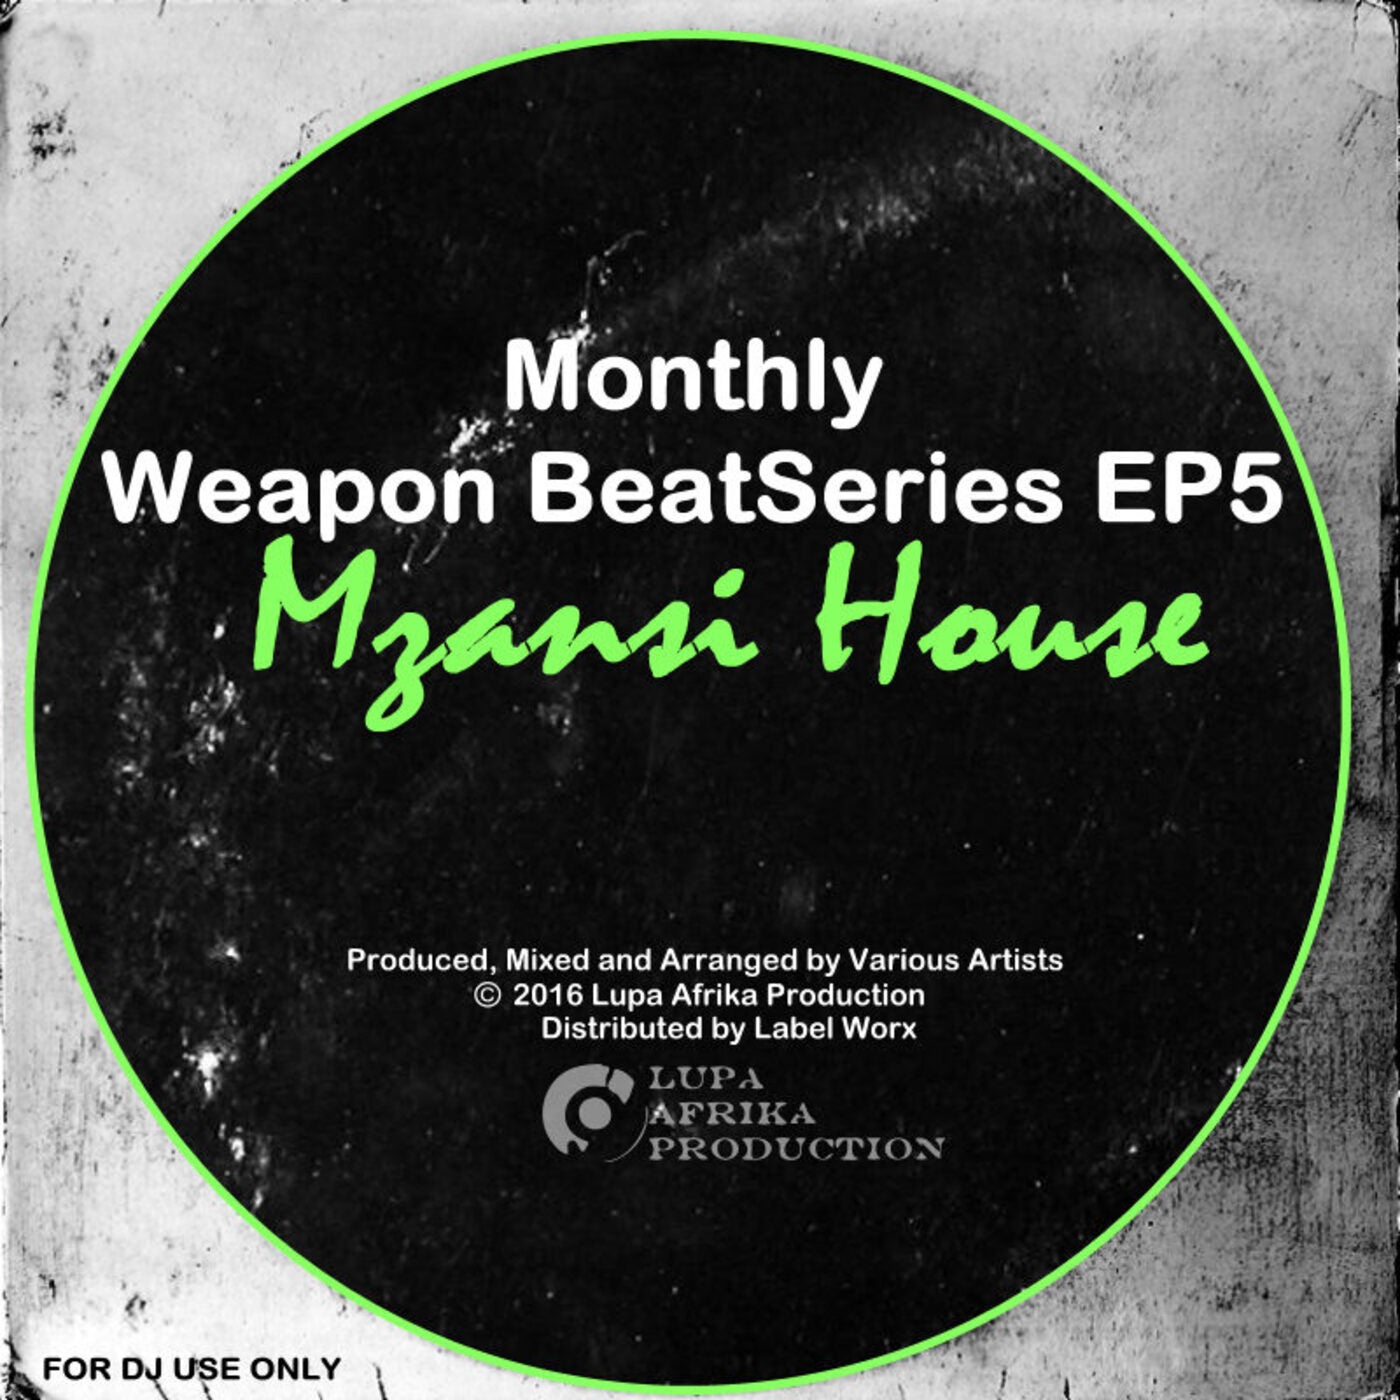 MONTHLY WEAPON BEAT SERIES EP5 - MZANSI HOUSE [LAP030]